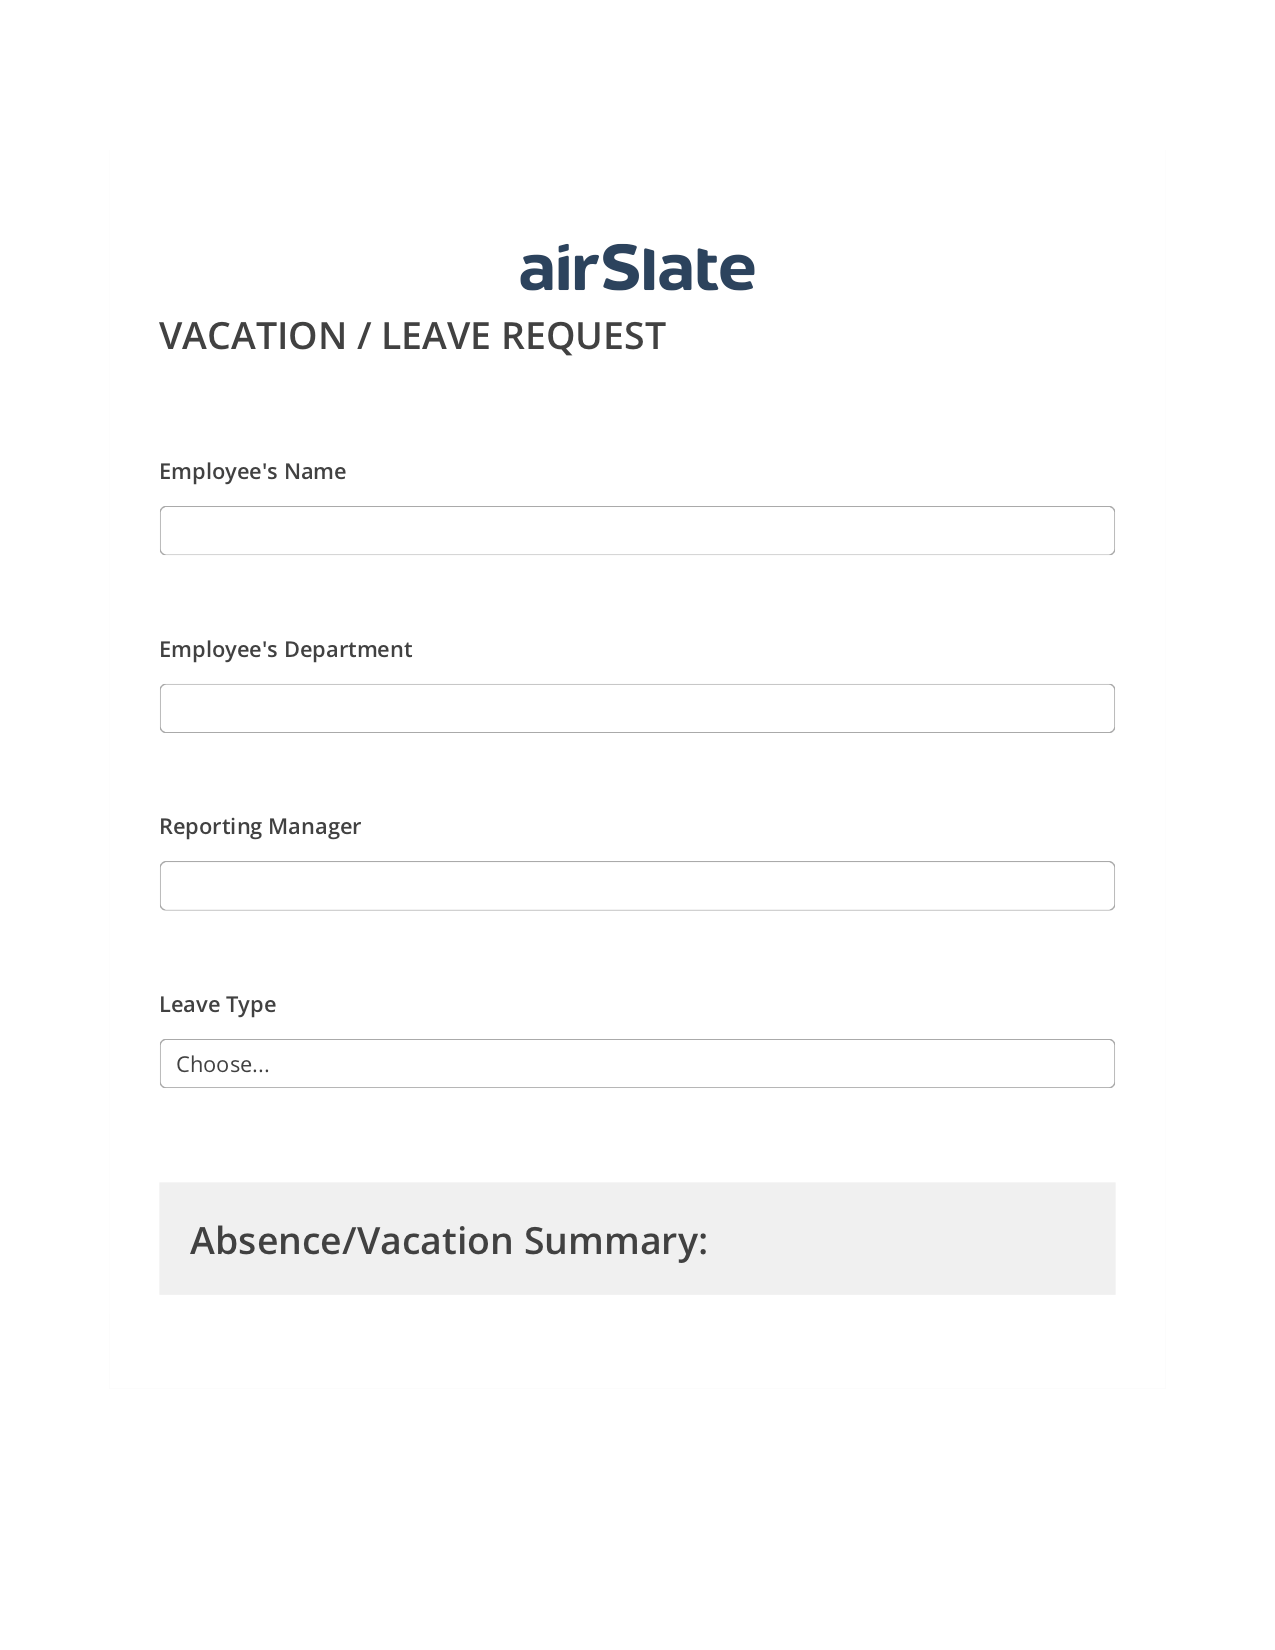 Vacation/Leave Request Workflow Pre-fill from CSV File Bot, Reminder Bot, Export to Smartsheet